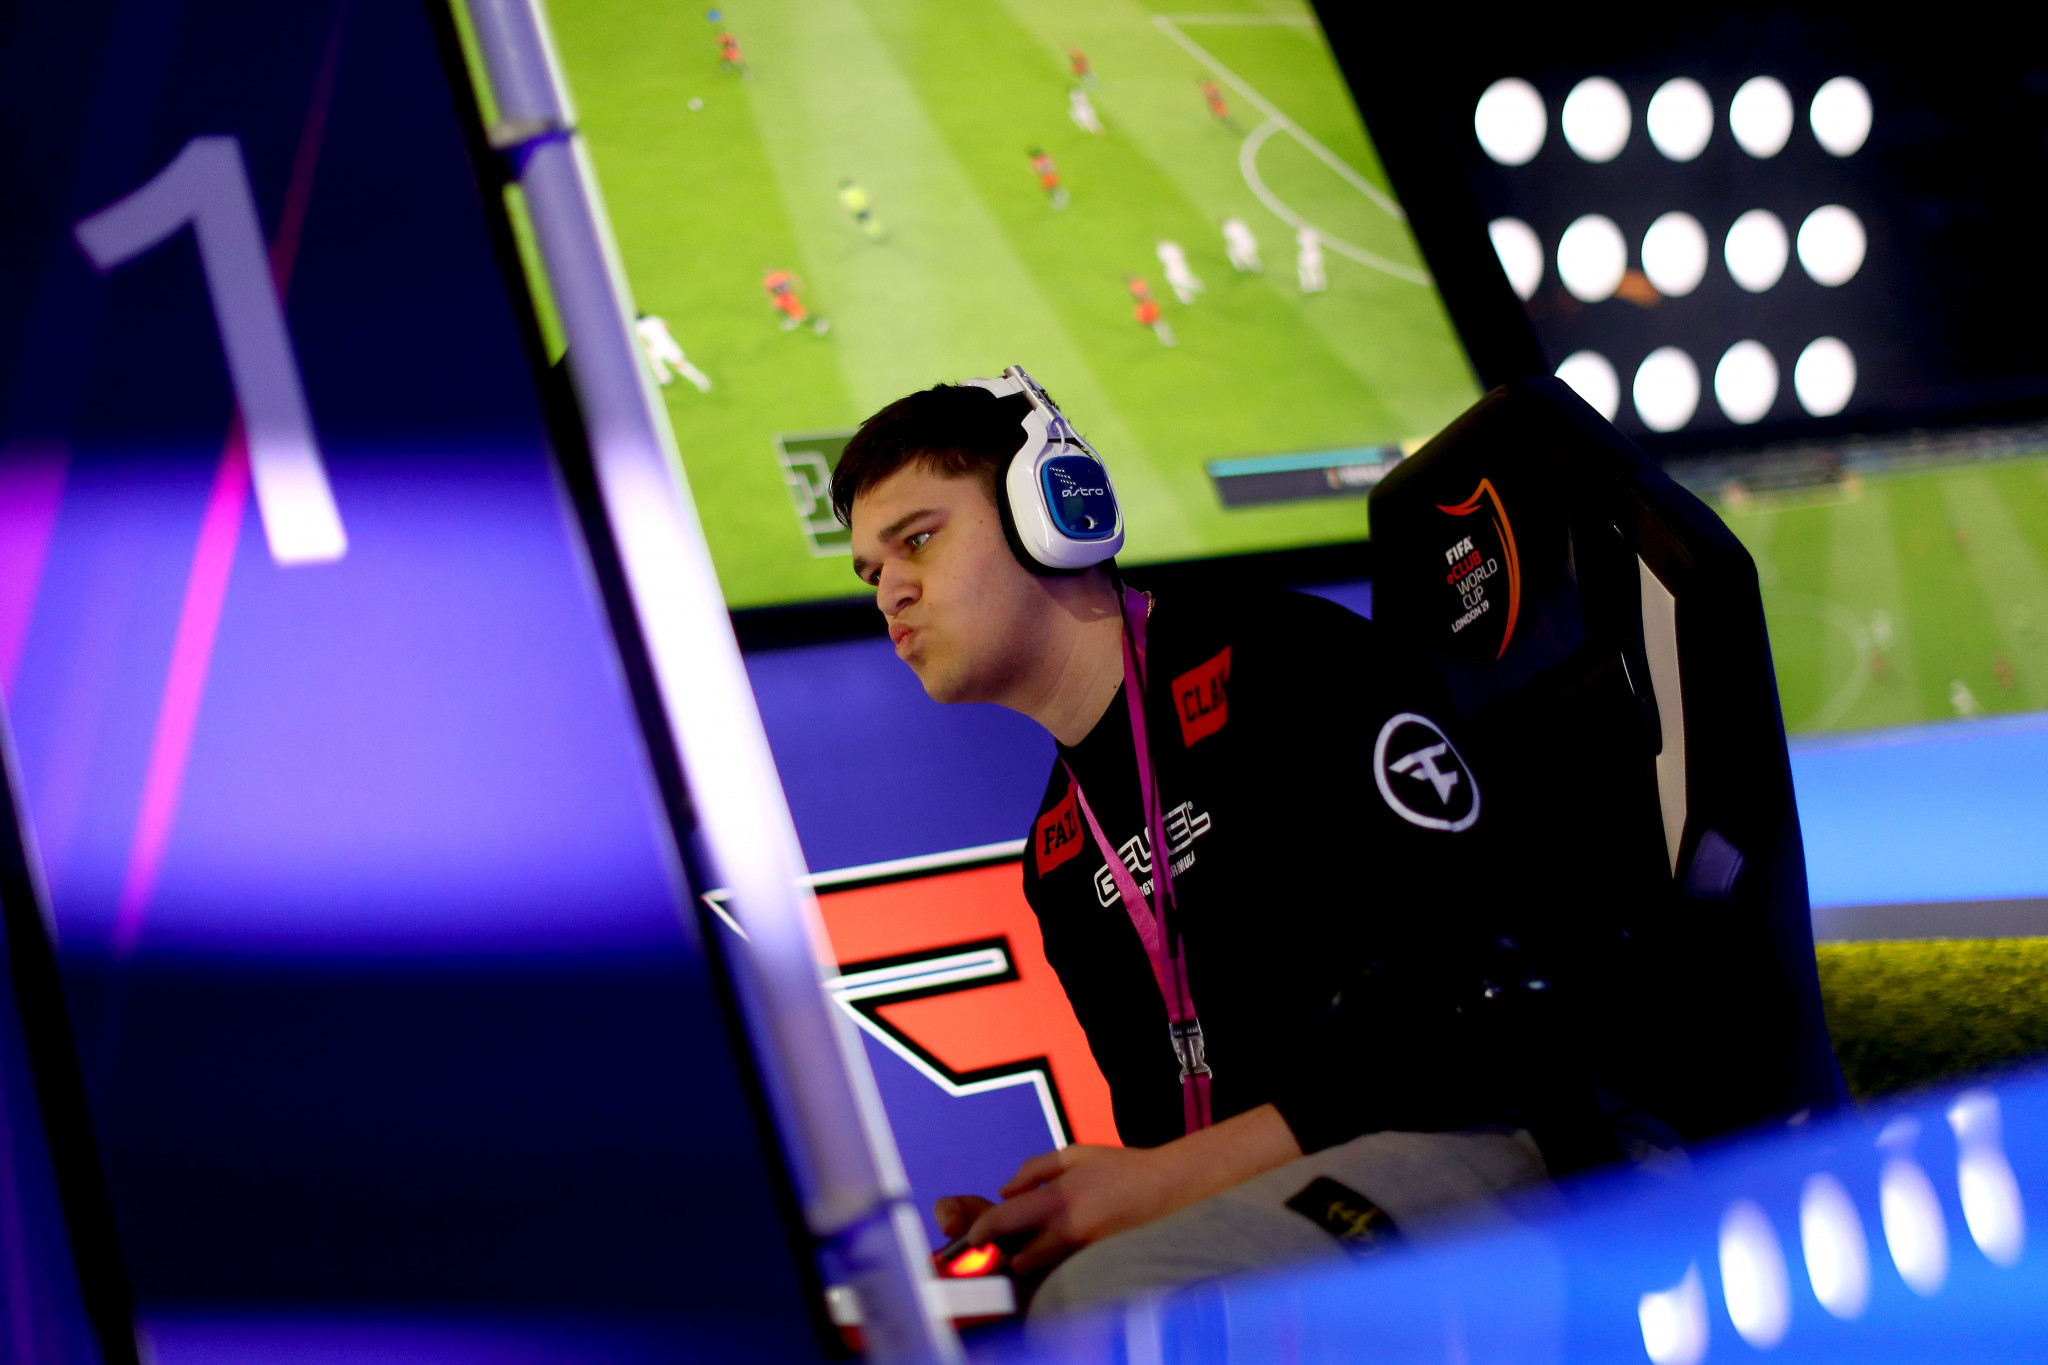 FIFA is seeking to share rights to its competitions with technology and mobile specialists, and said it is working with industry experts to develop a long-term relationship with esports and gaming ©Getty Images